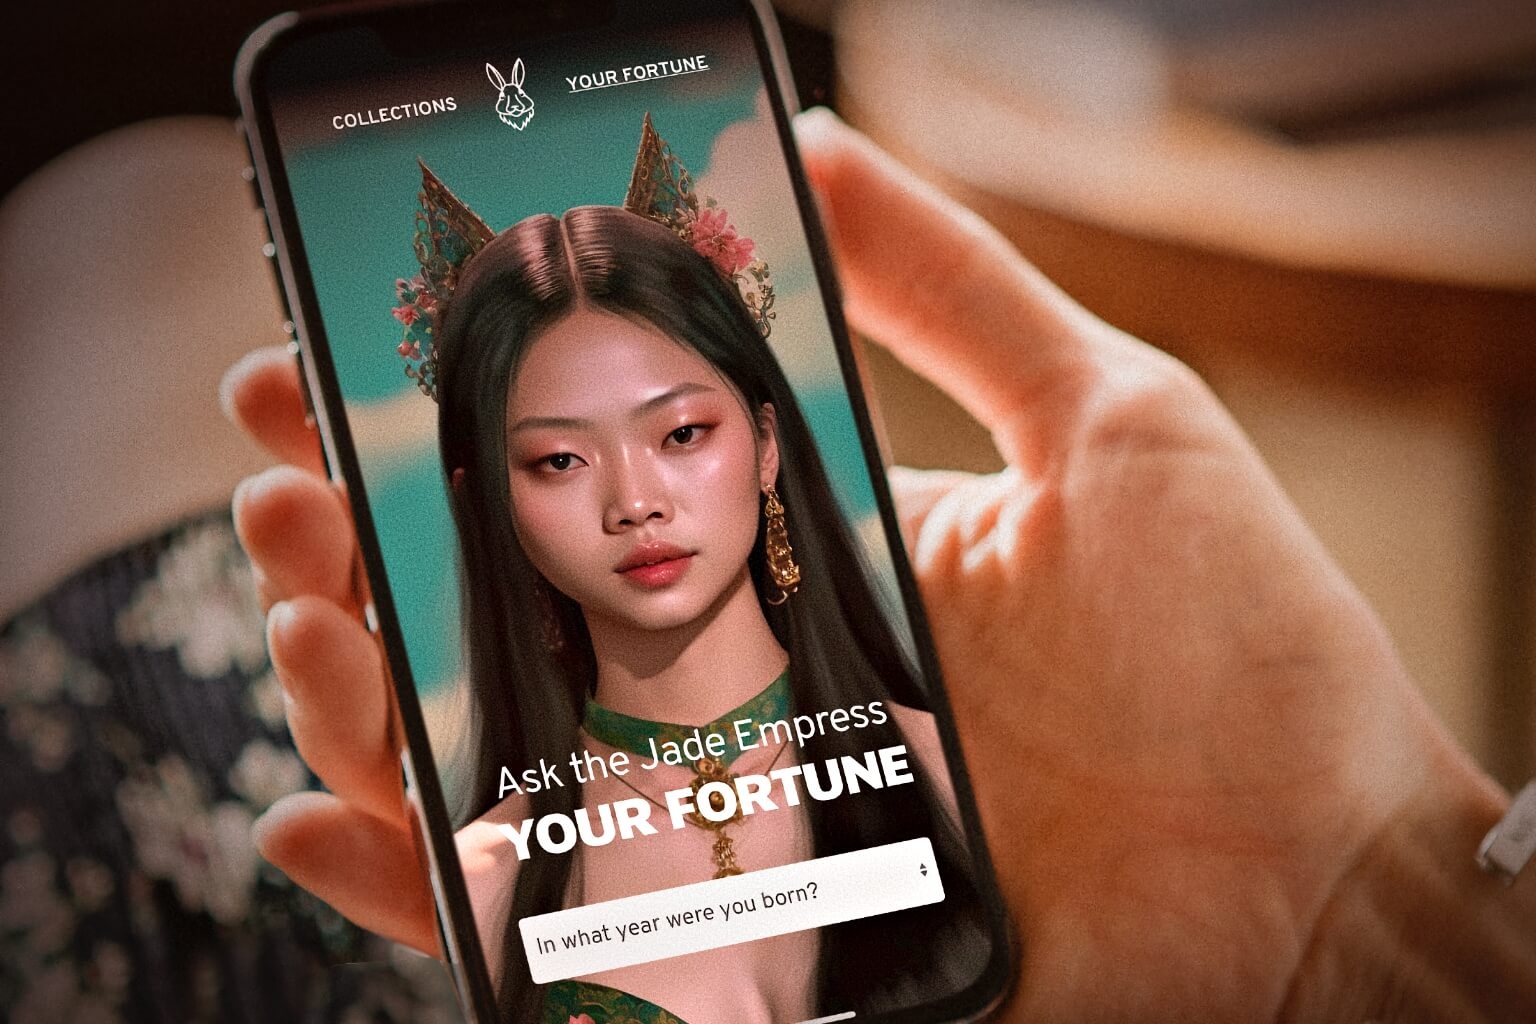 Get your fortune